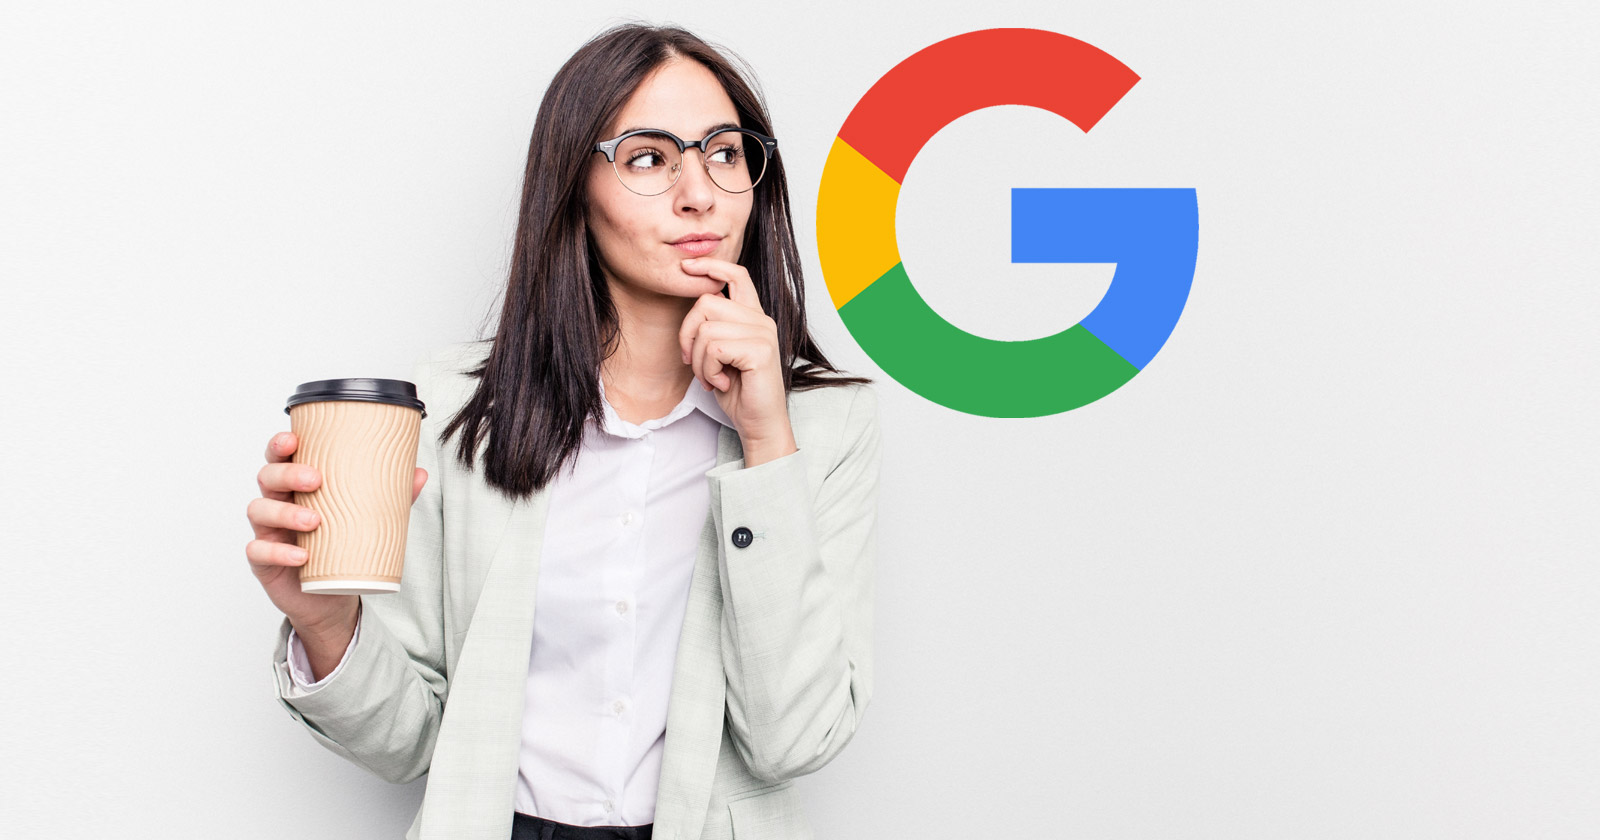 Is This Google’s Useful Content material Algorithm?